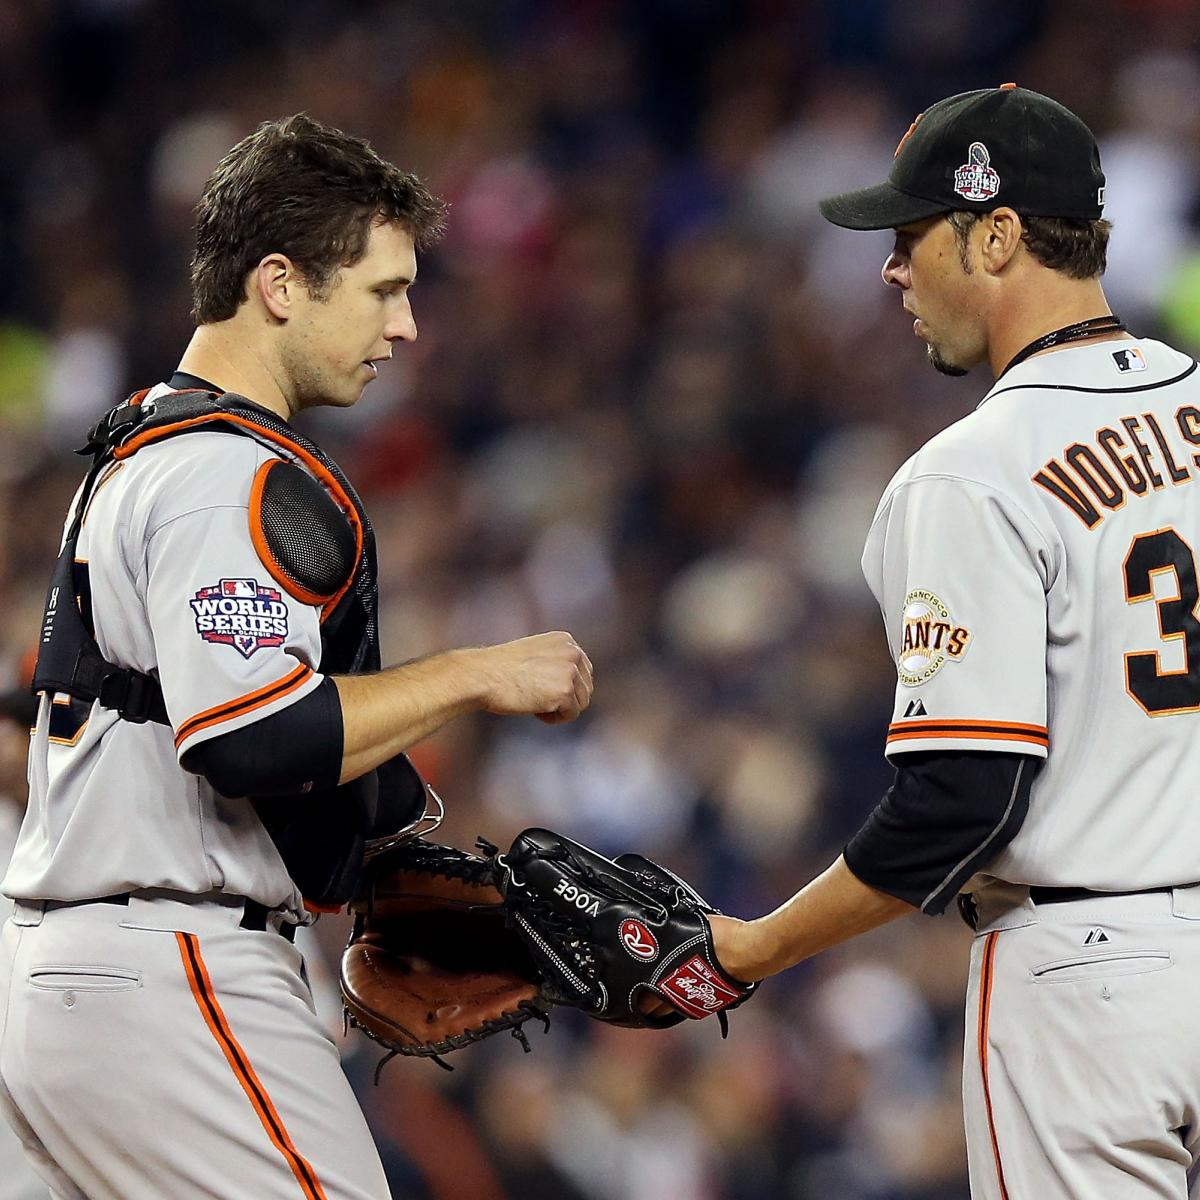 San Francisco Giants Hoping to Continue Success with Minor League Free